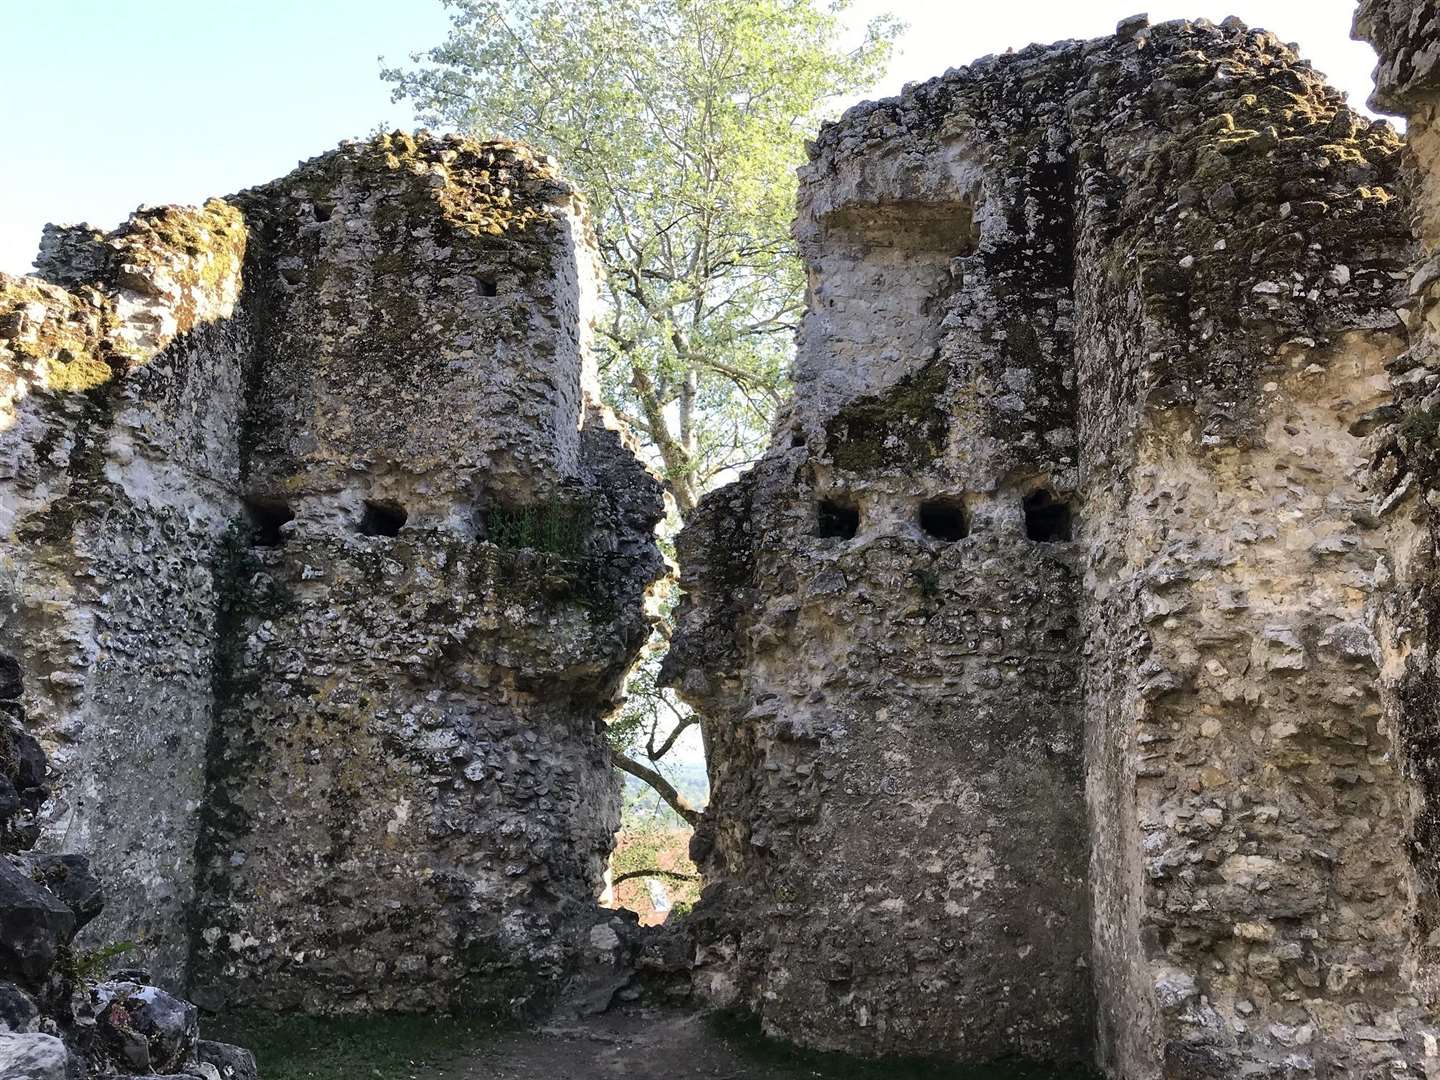 A view from inside the ruined walls of Sutton Valence Castle